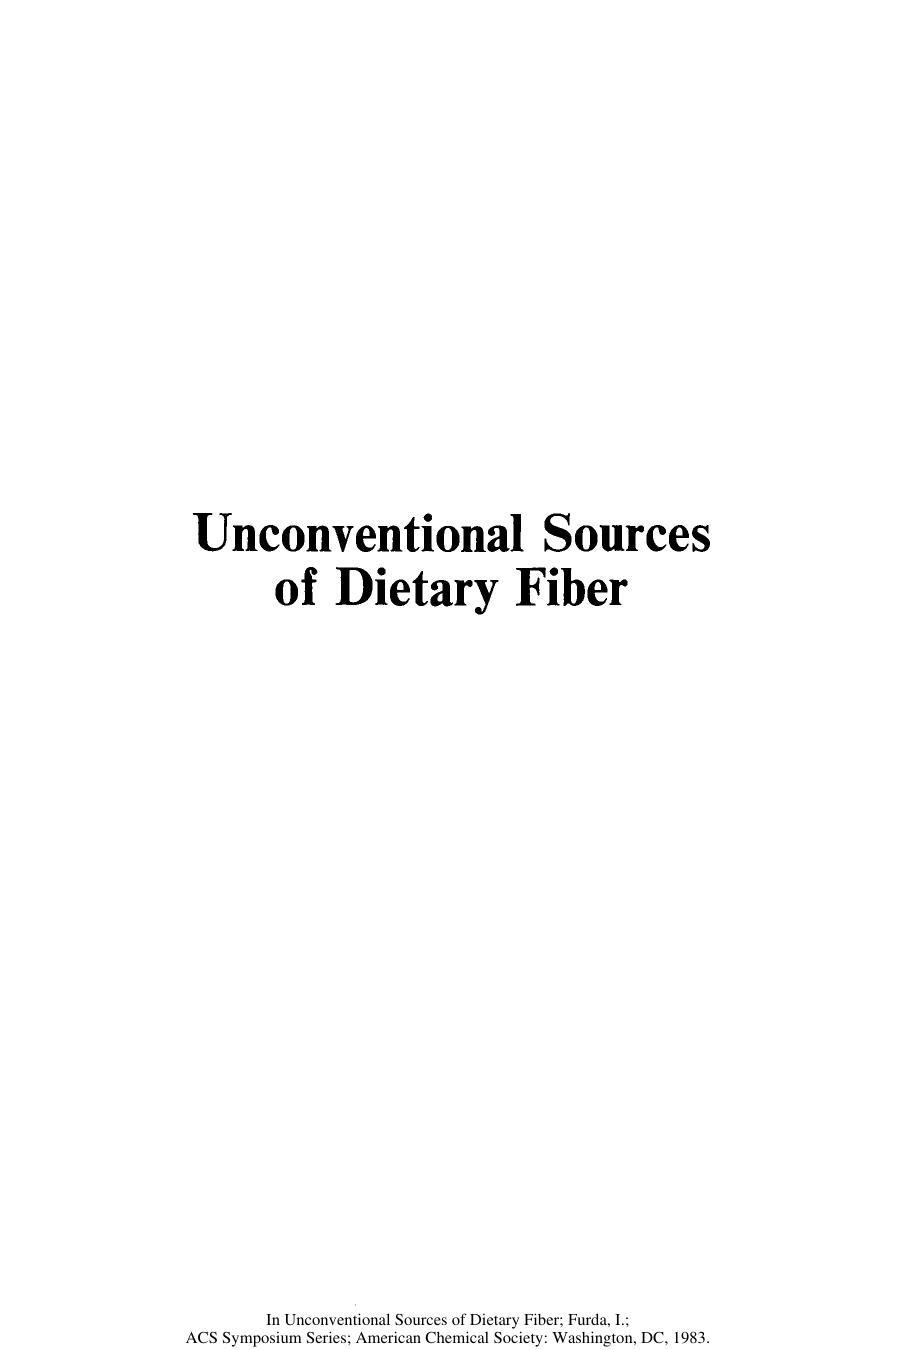 Unconventional Sources of Dietary Fiber. Physiological and in Vitro Functional Properties 1983